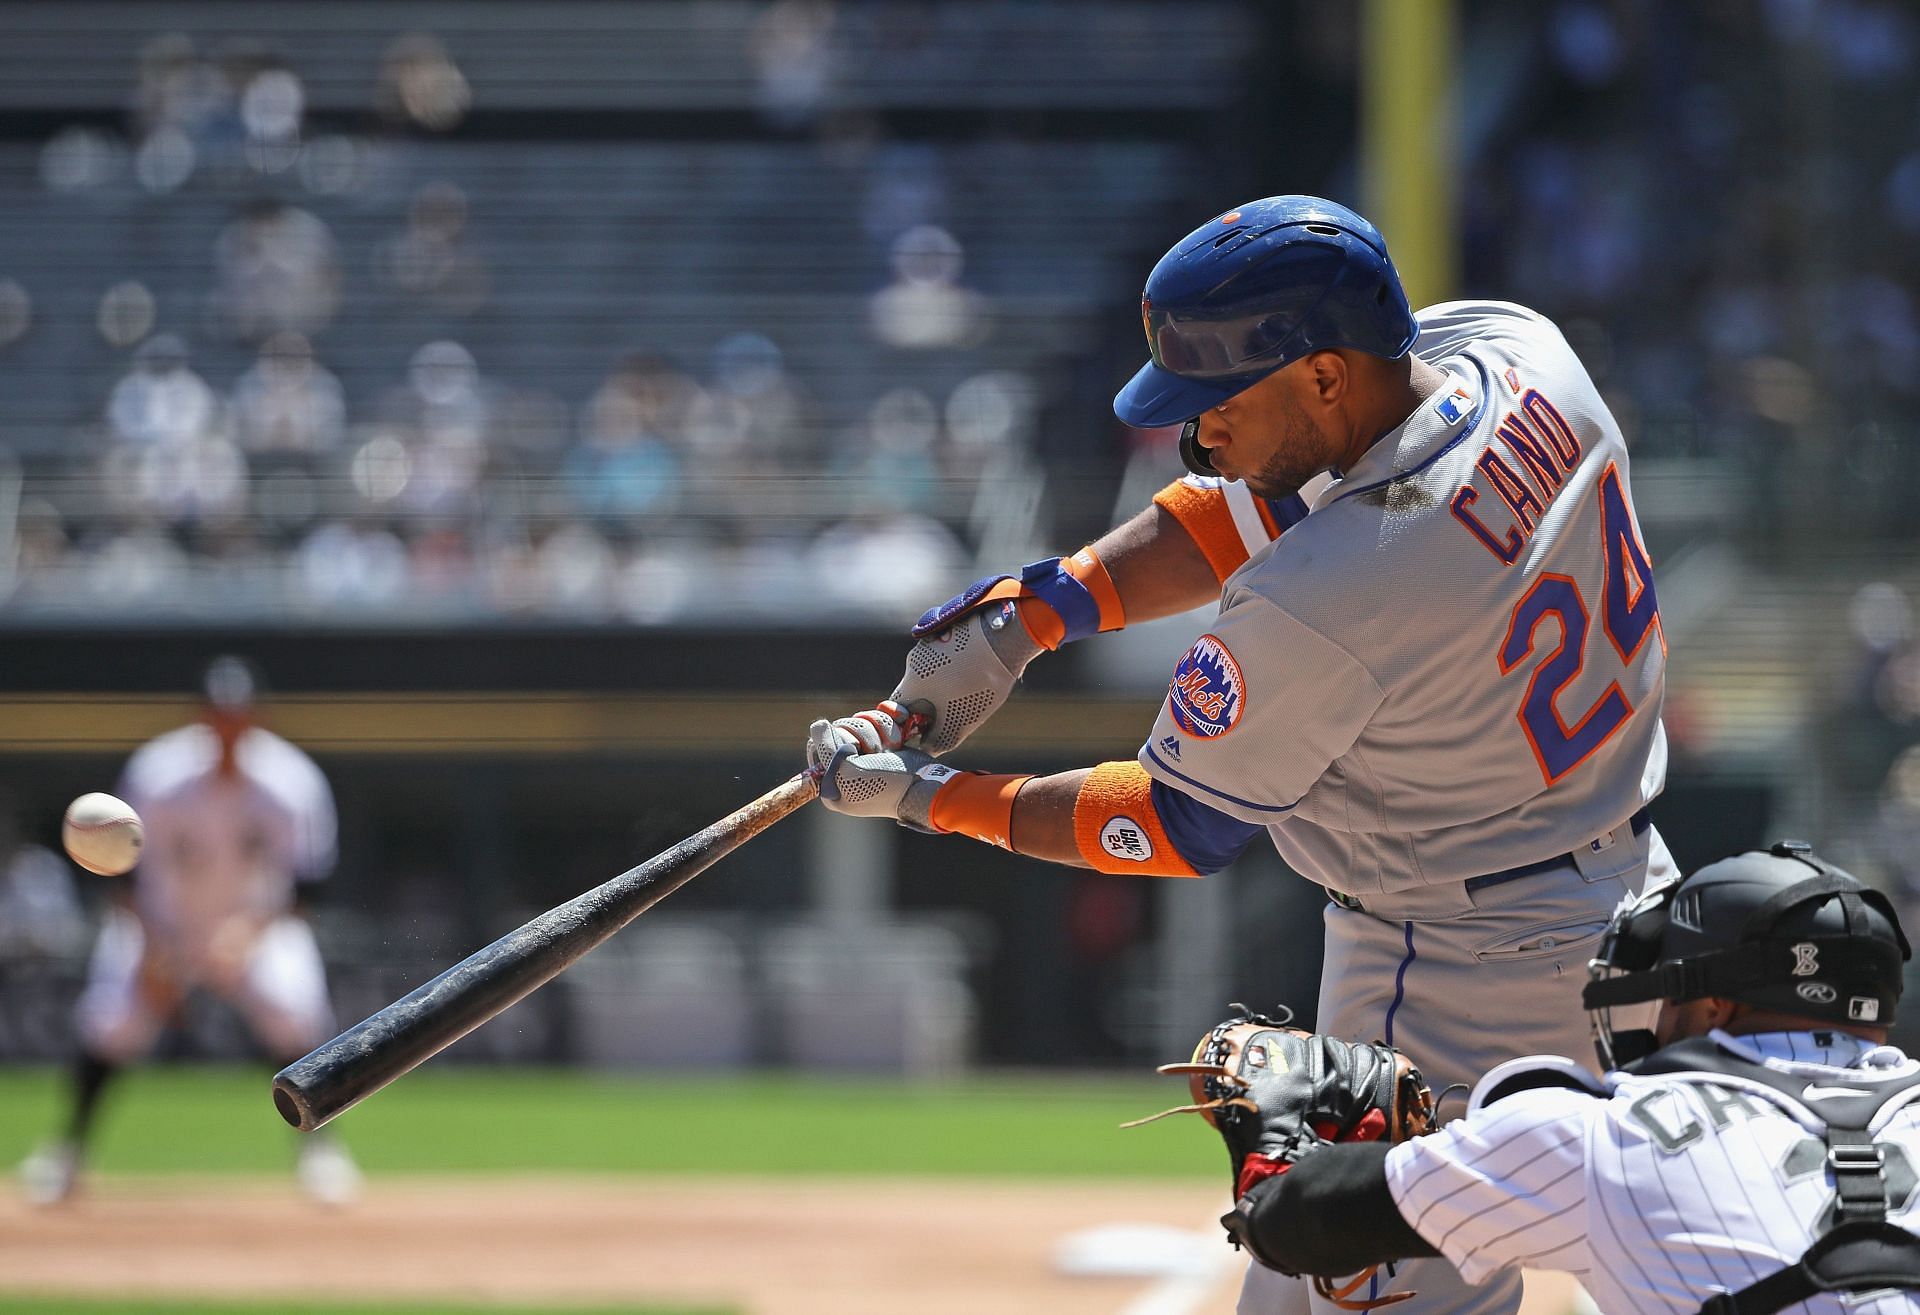 Should Robinson Cano even be in the Mets lineup: Sherman